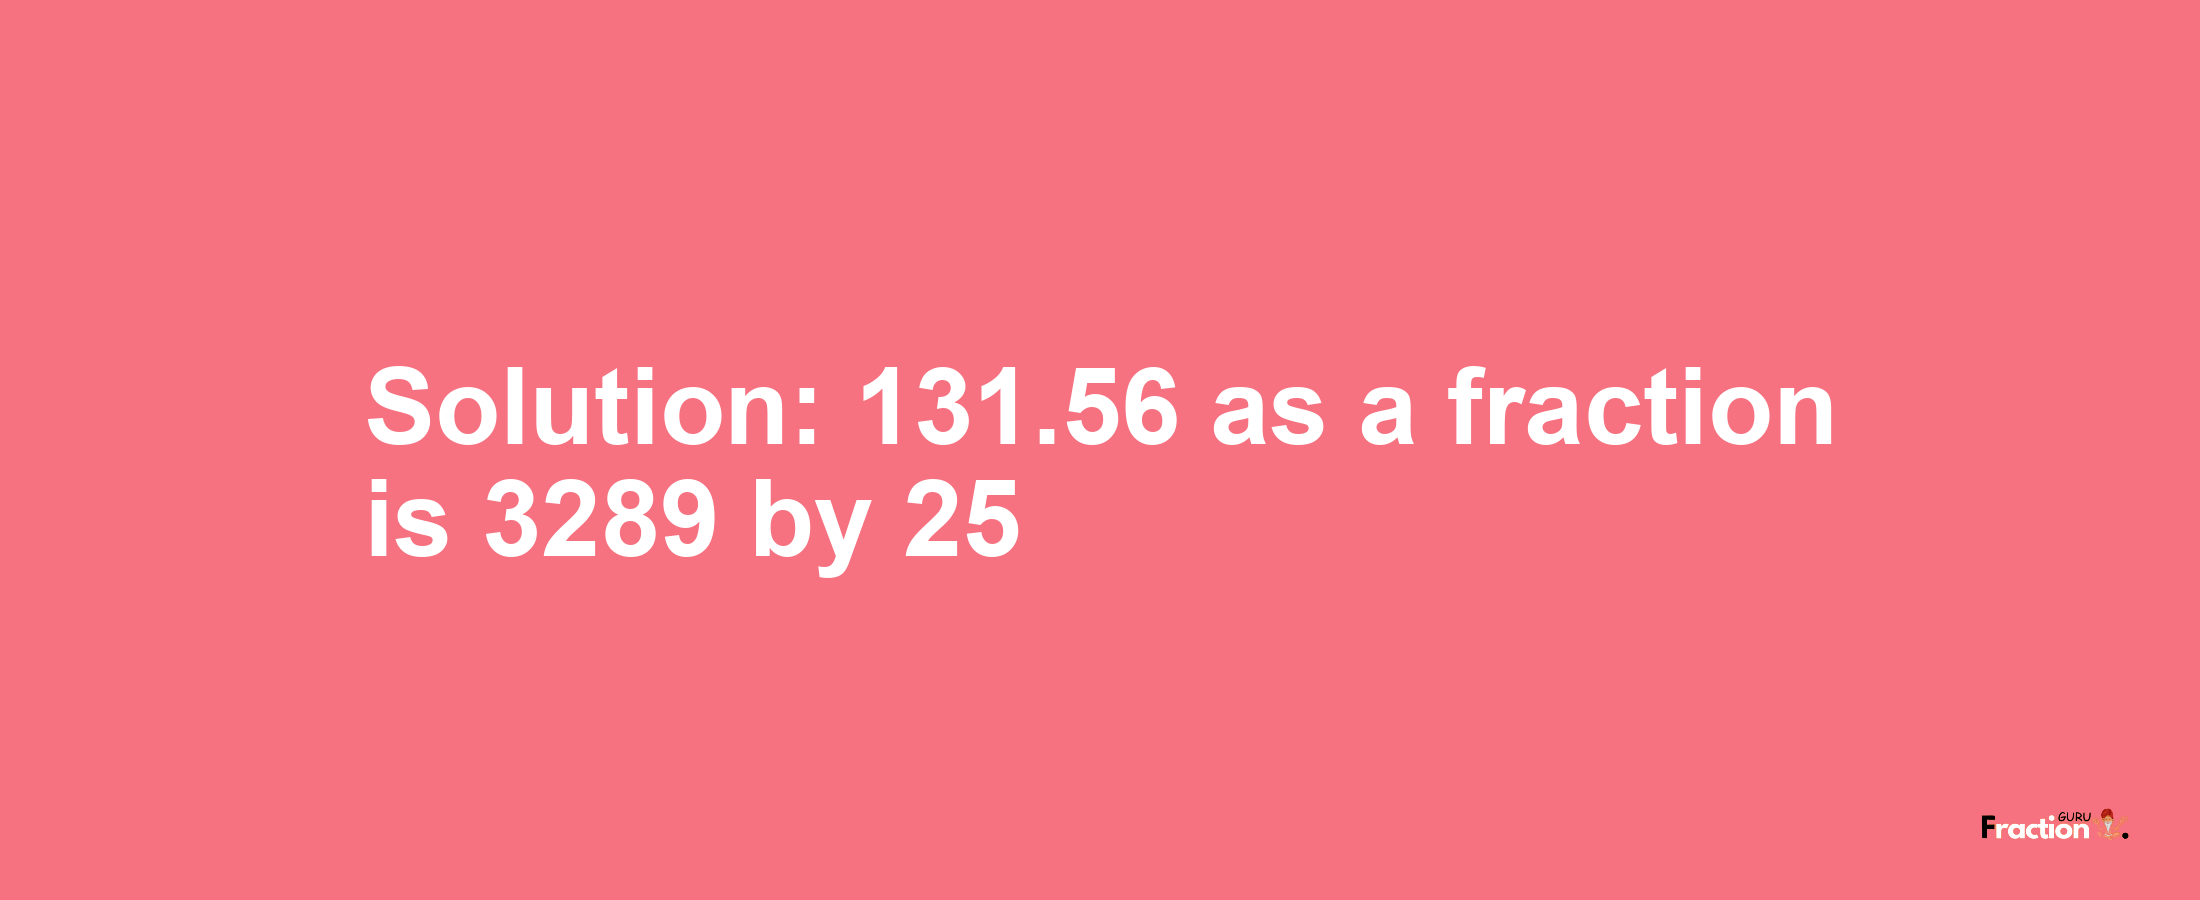 Solution:131.56 as a fraction is 3289/25